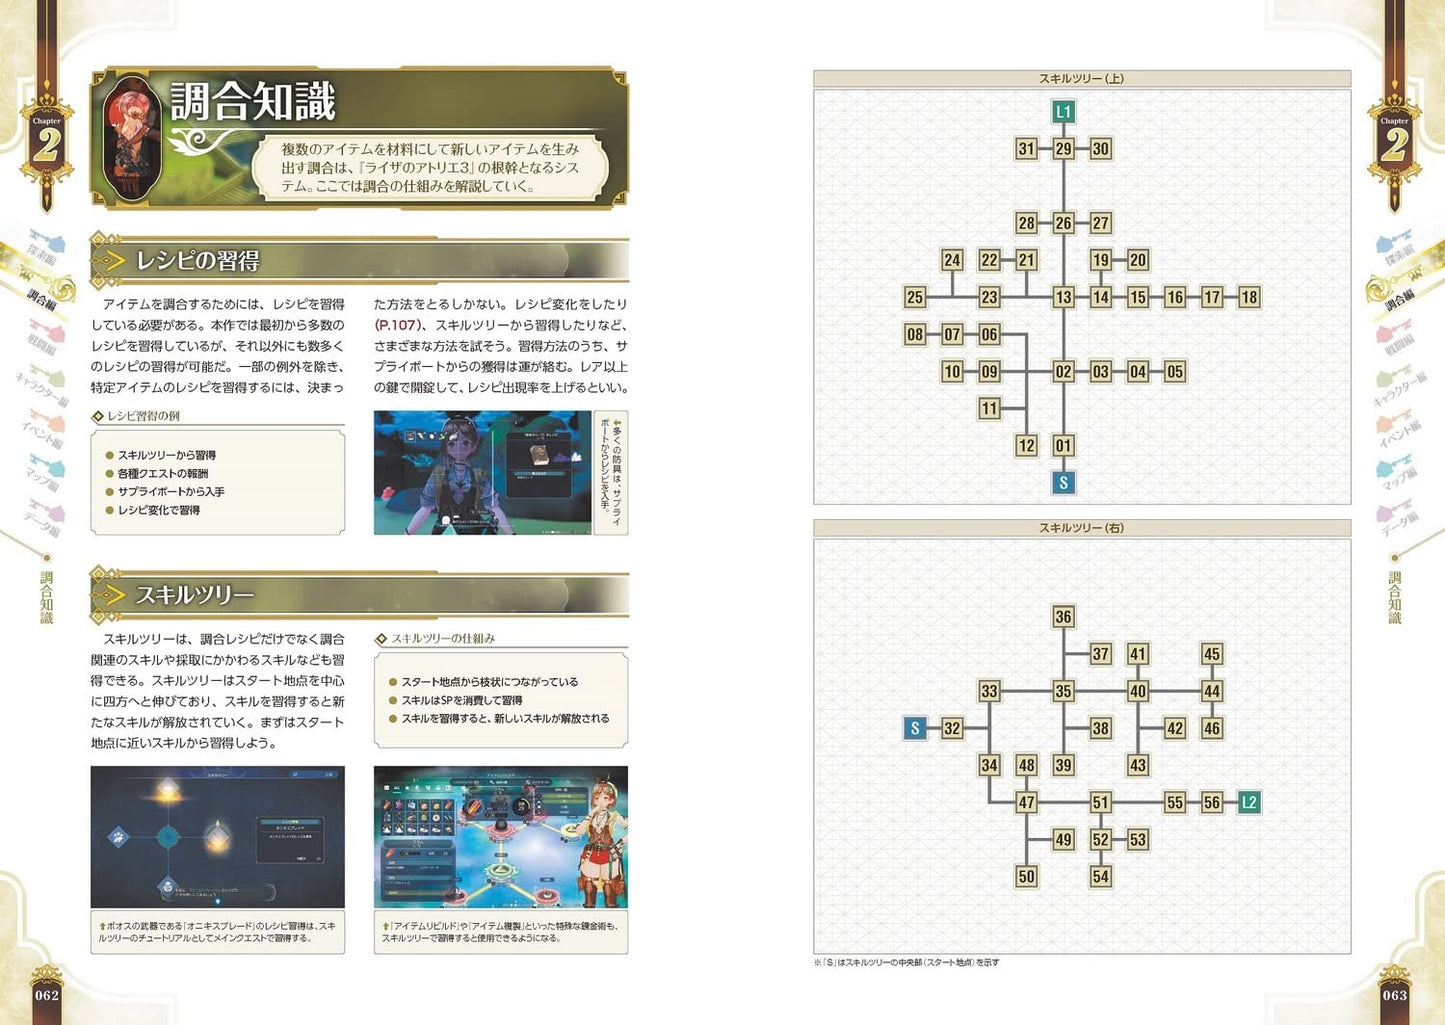 Atelier Ryza 3 Alchemist of the End & the Secret Key The Complete Guide